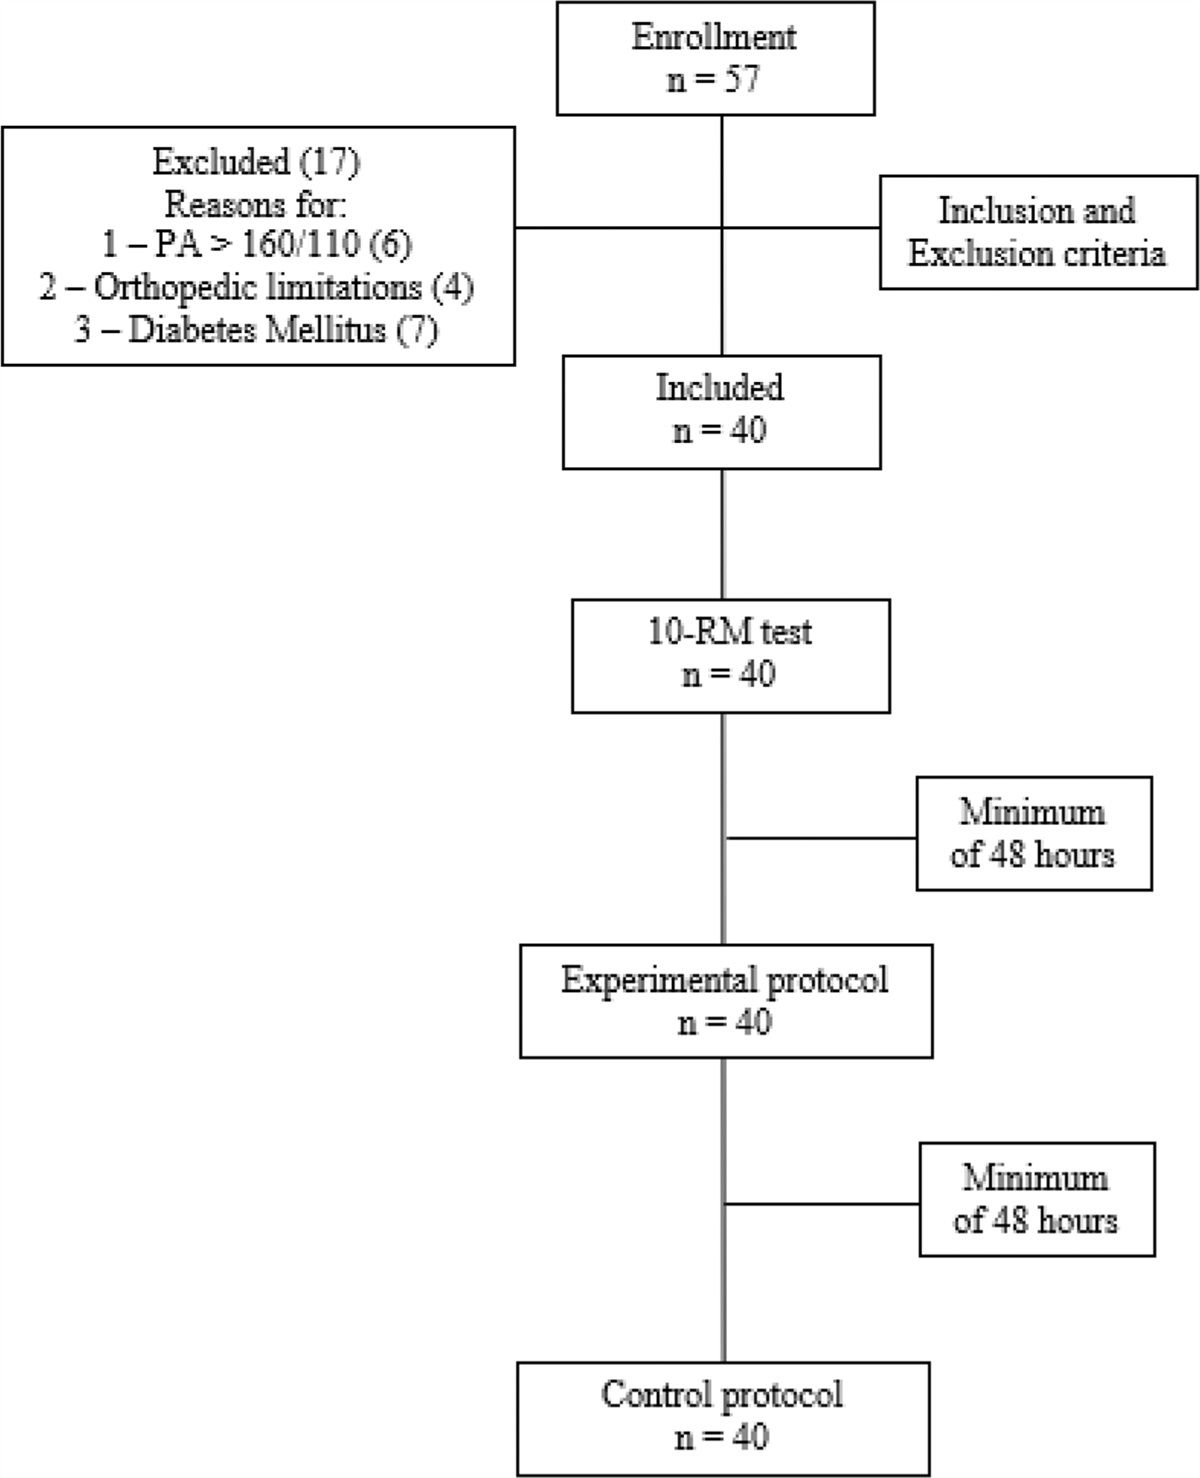 Acute effects of high-intensity resistance training on central blood pressure parameters of elderly hypertensive women: a crossover clinical trial